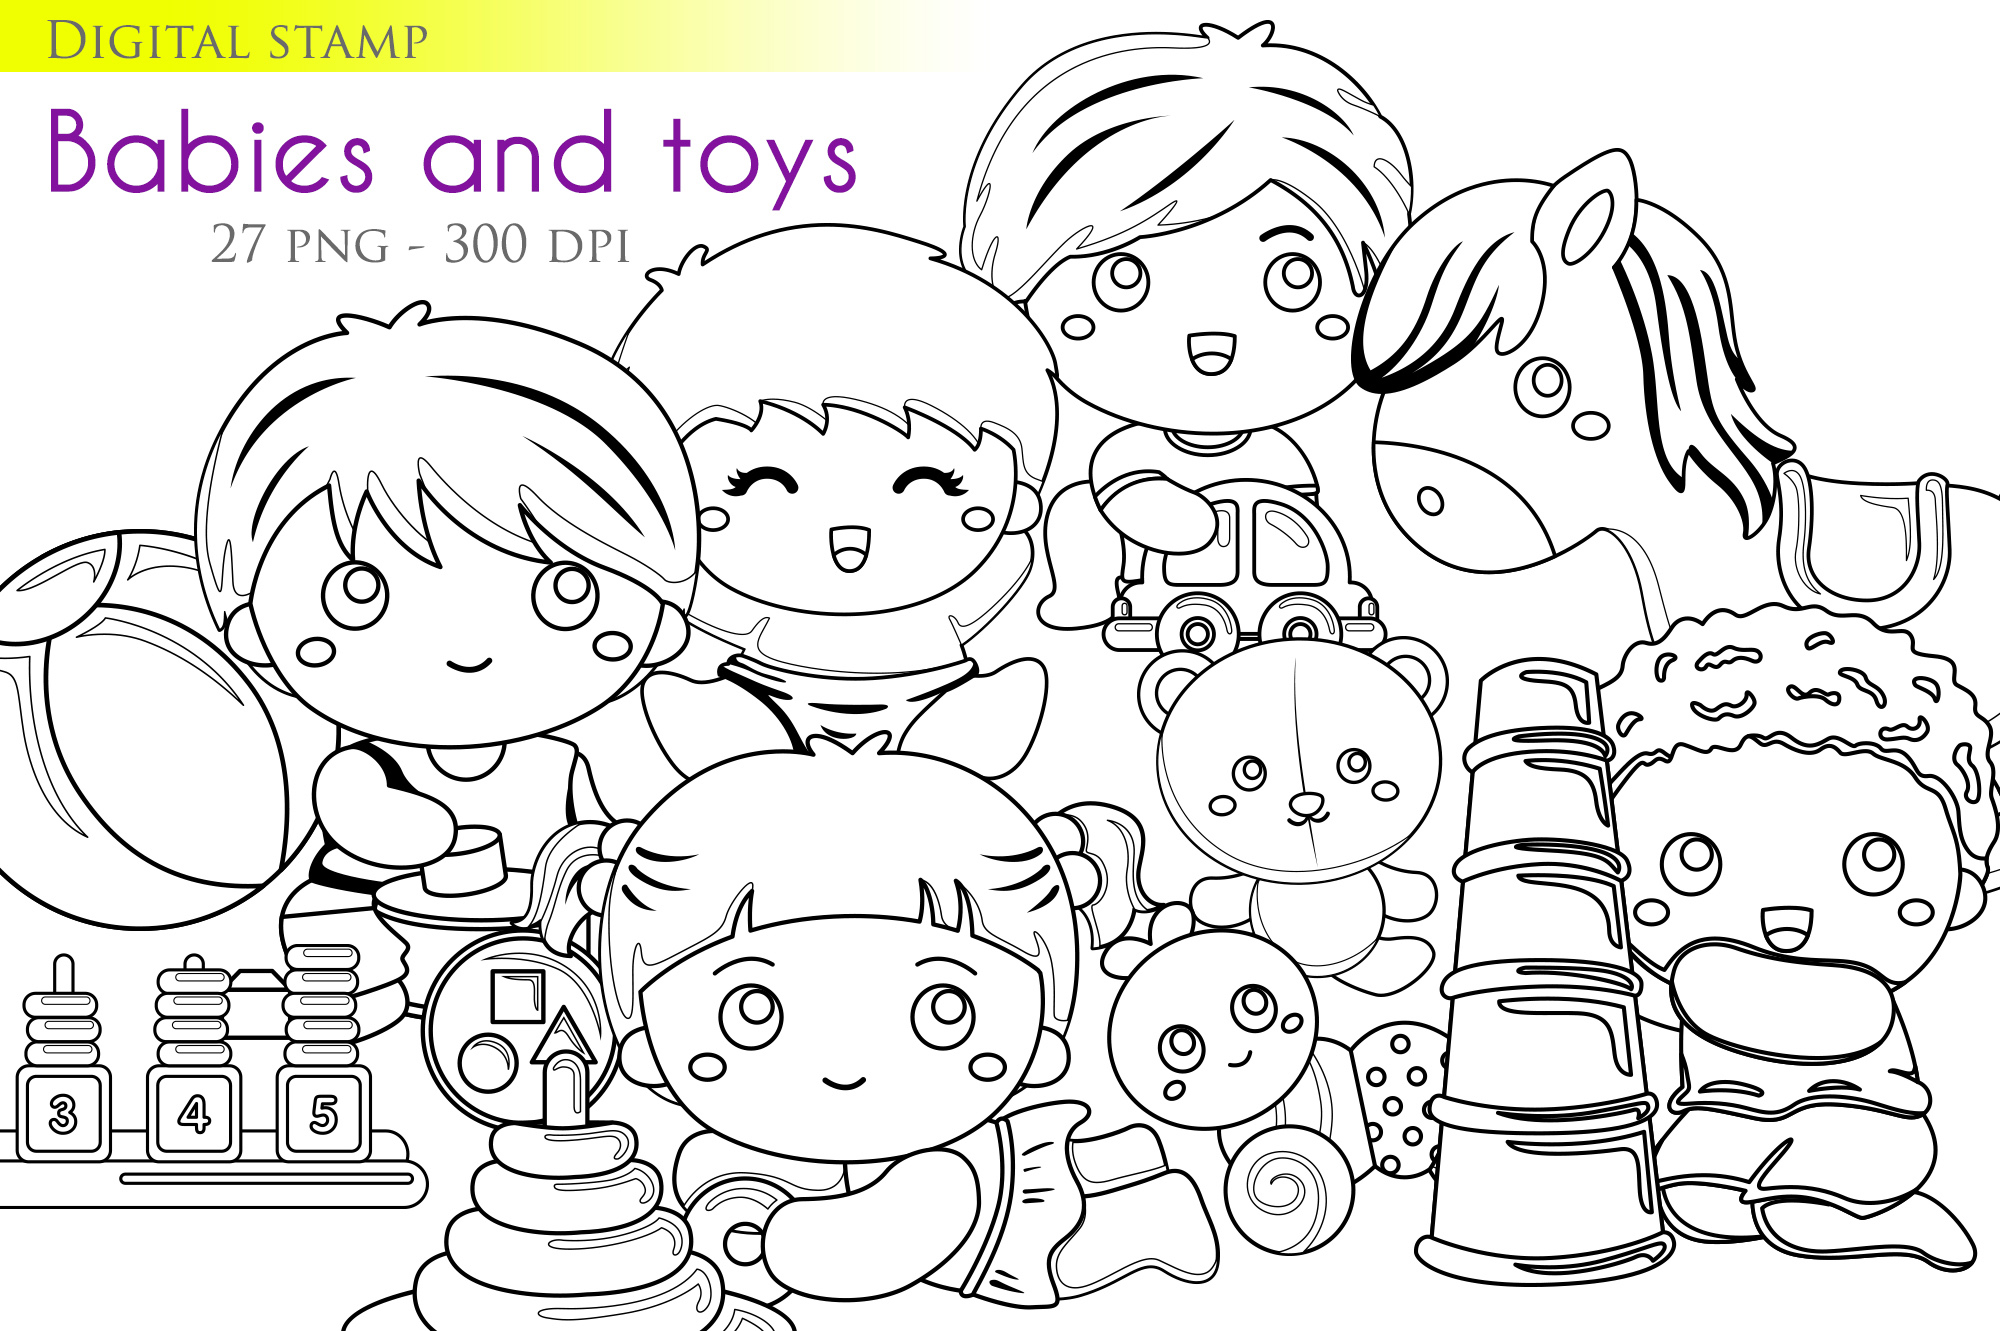 So cute outline babies with toys.